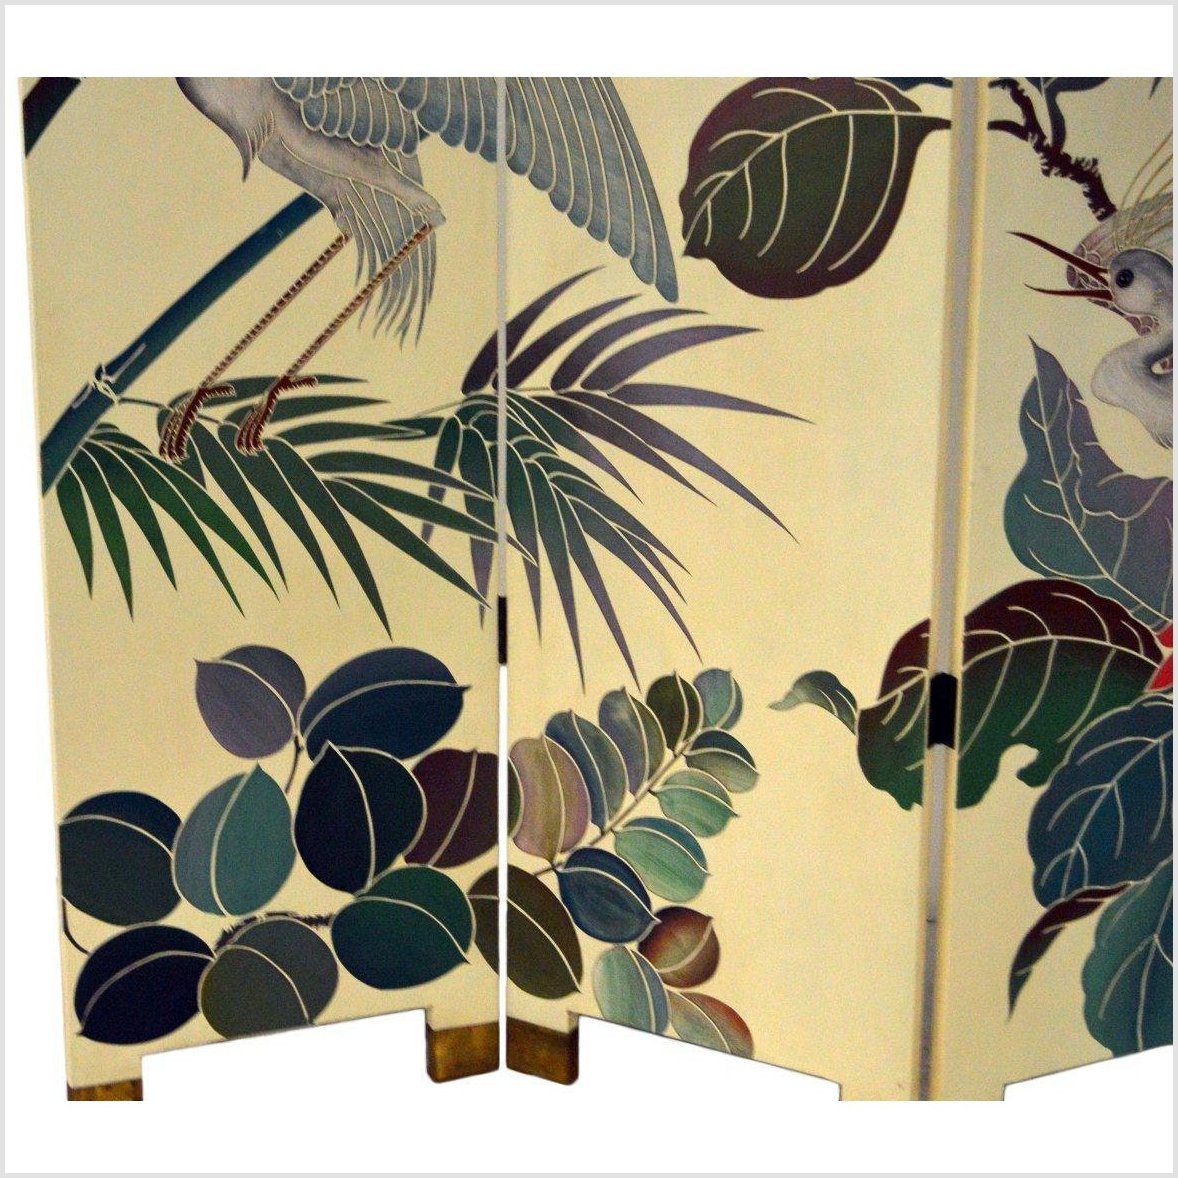 4-Panel Screen Designed with Cranes and Tropical Plants-YN2850-14. Asian & Chinese Furniture, Art, Antiques, Vintage Home Décor for sale at FEA Home